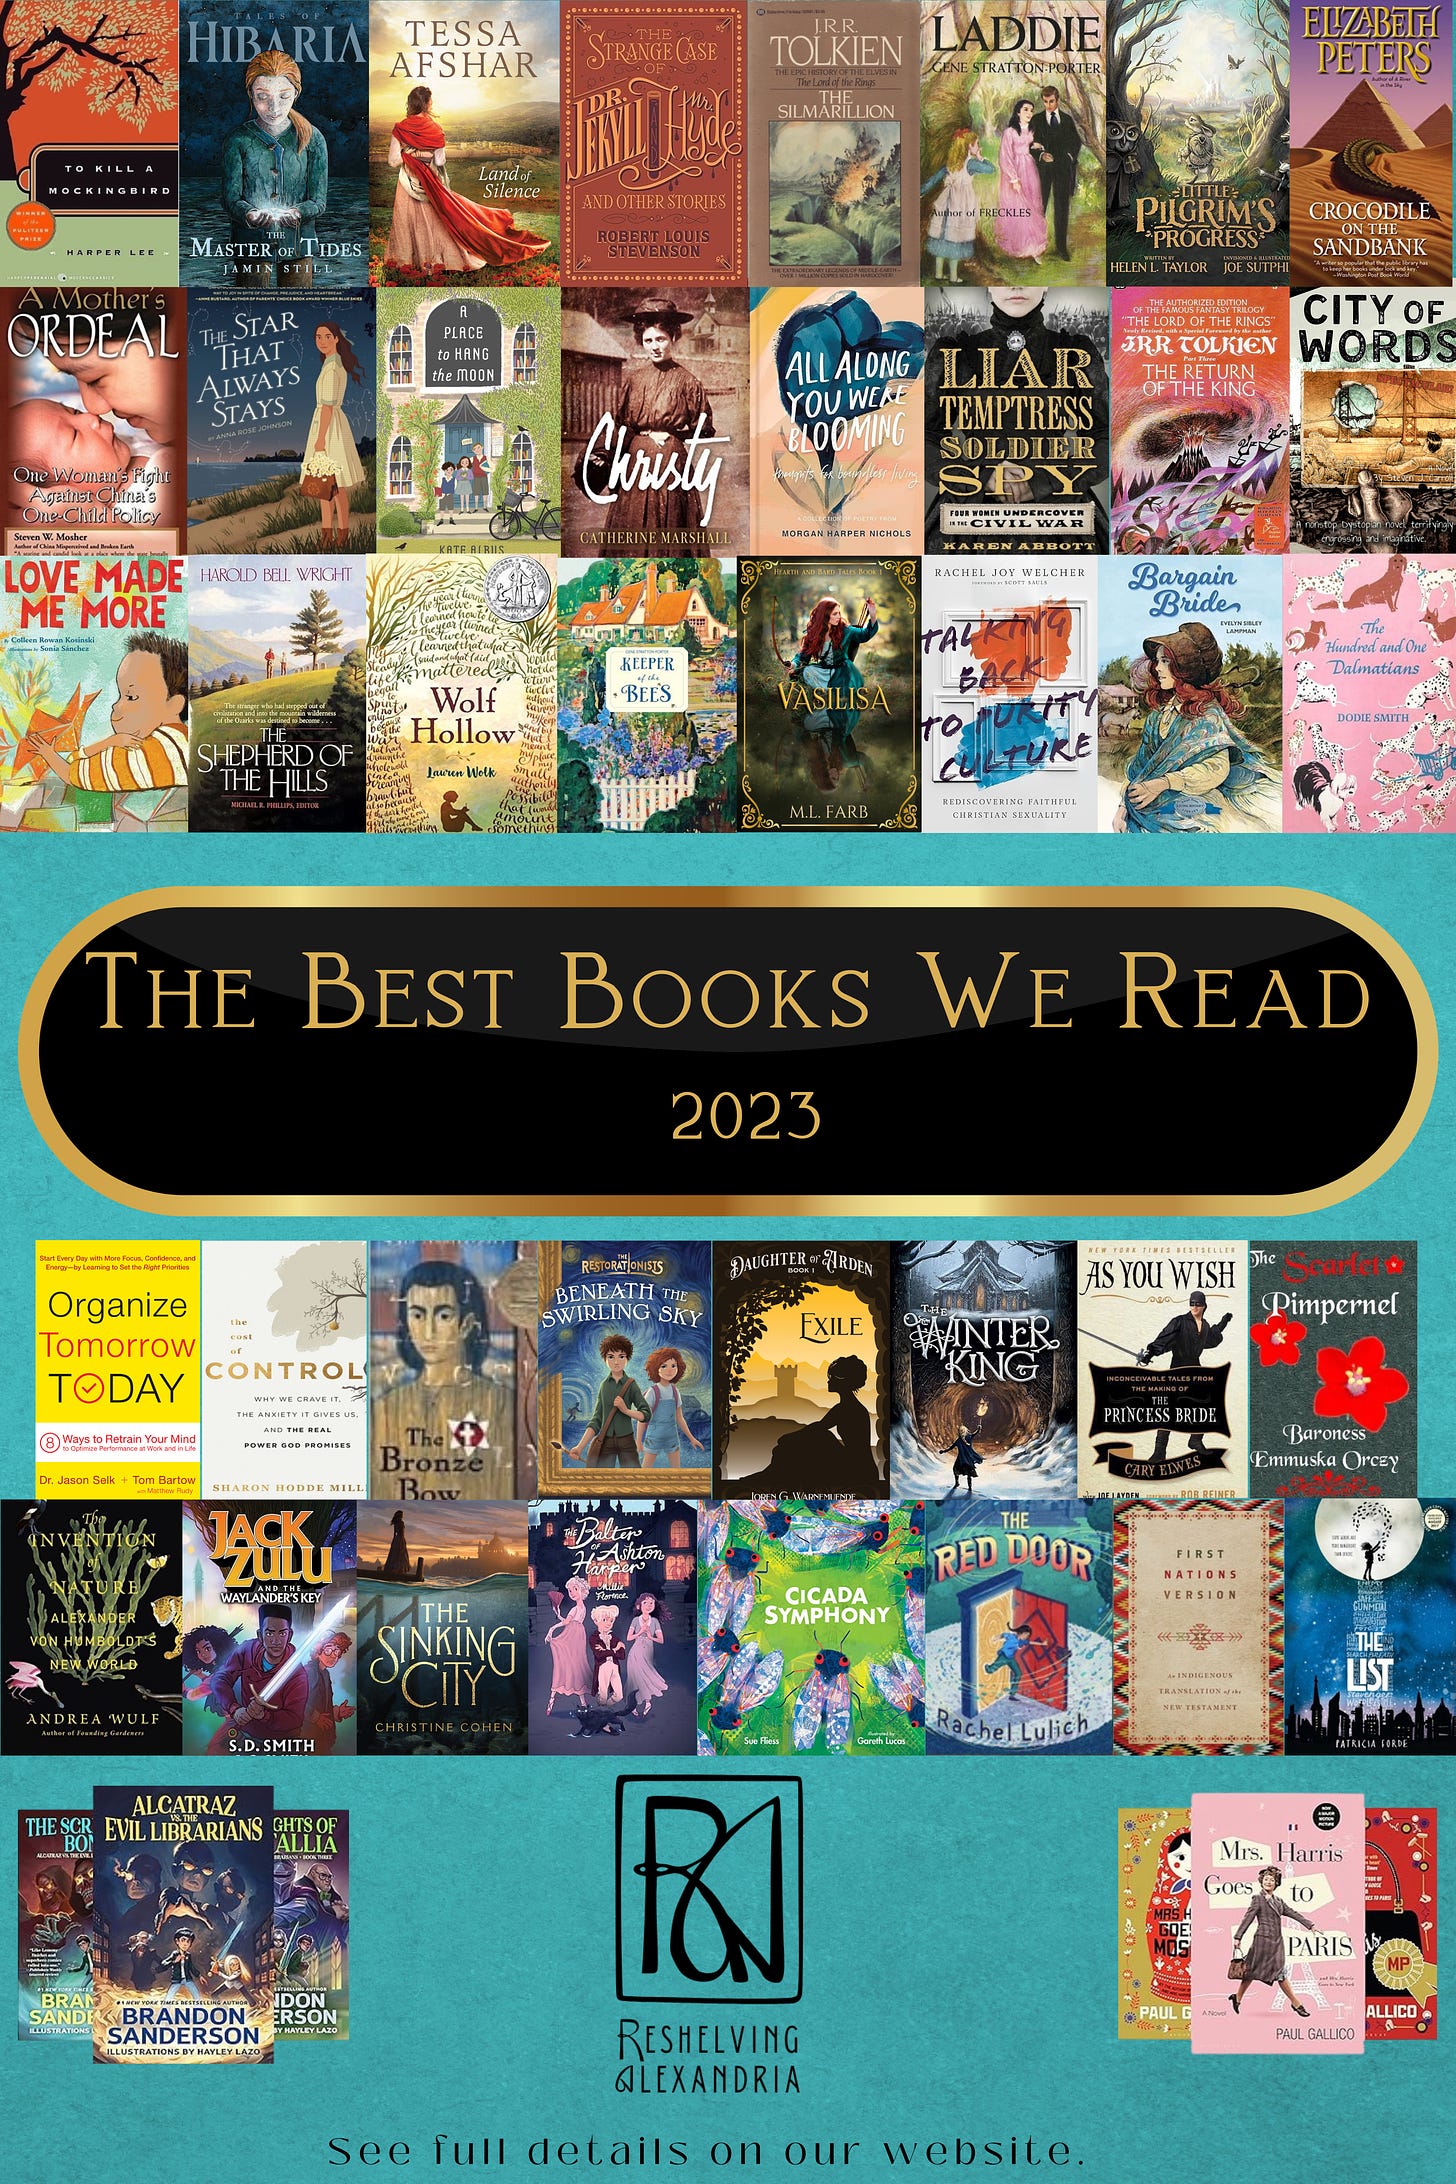 The Best Books We Read in 2023